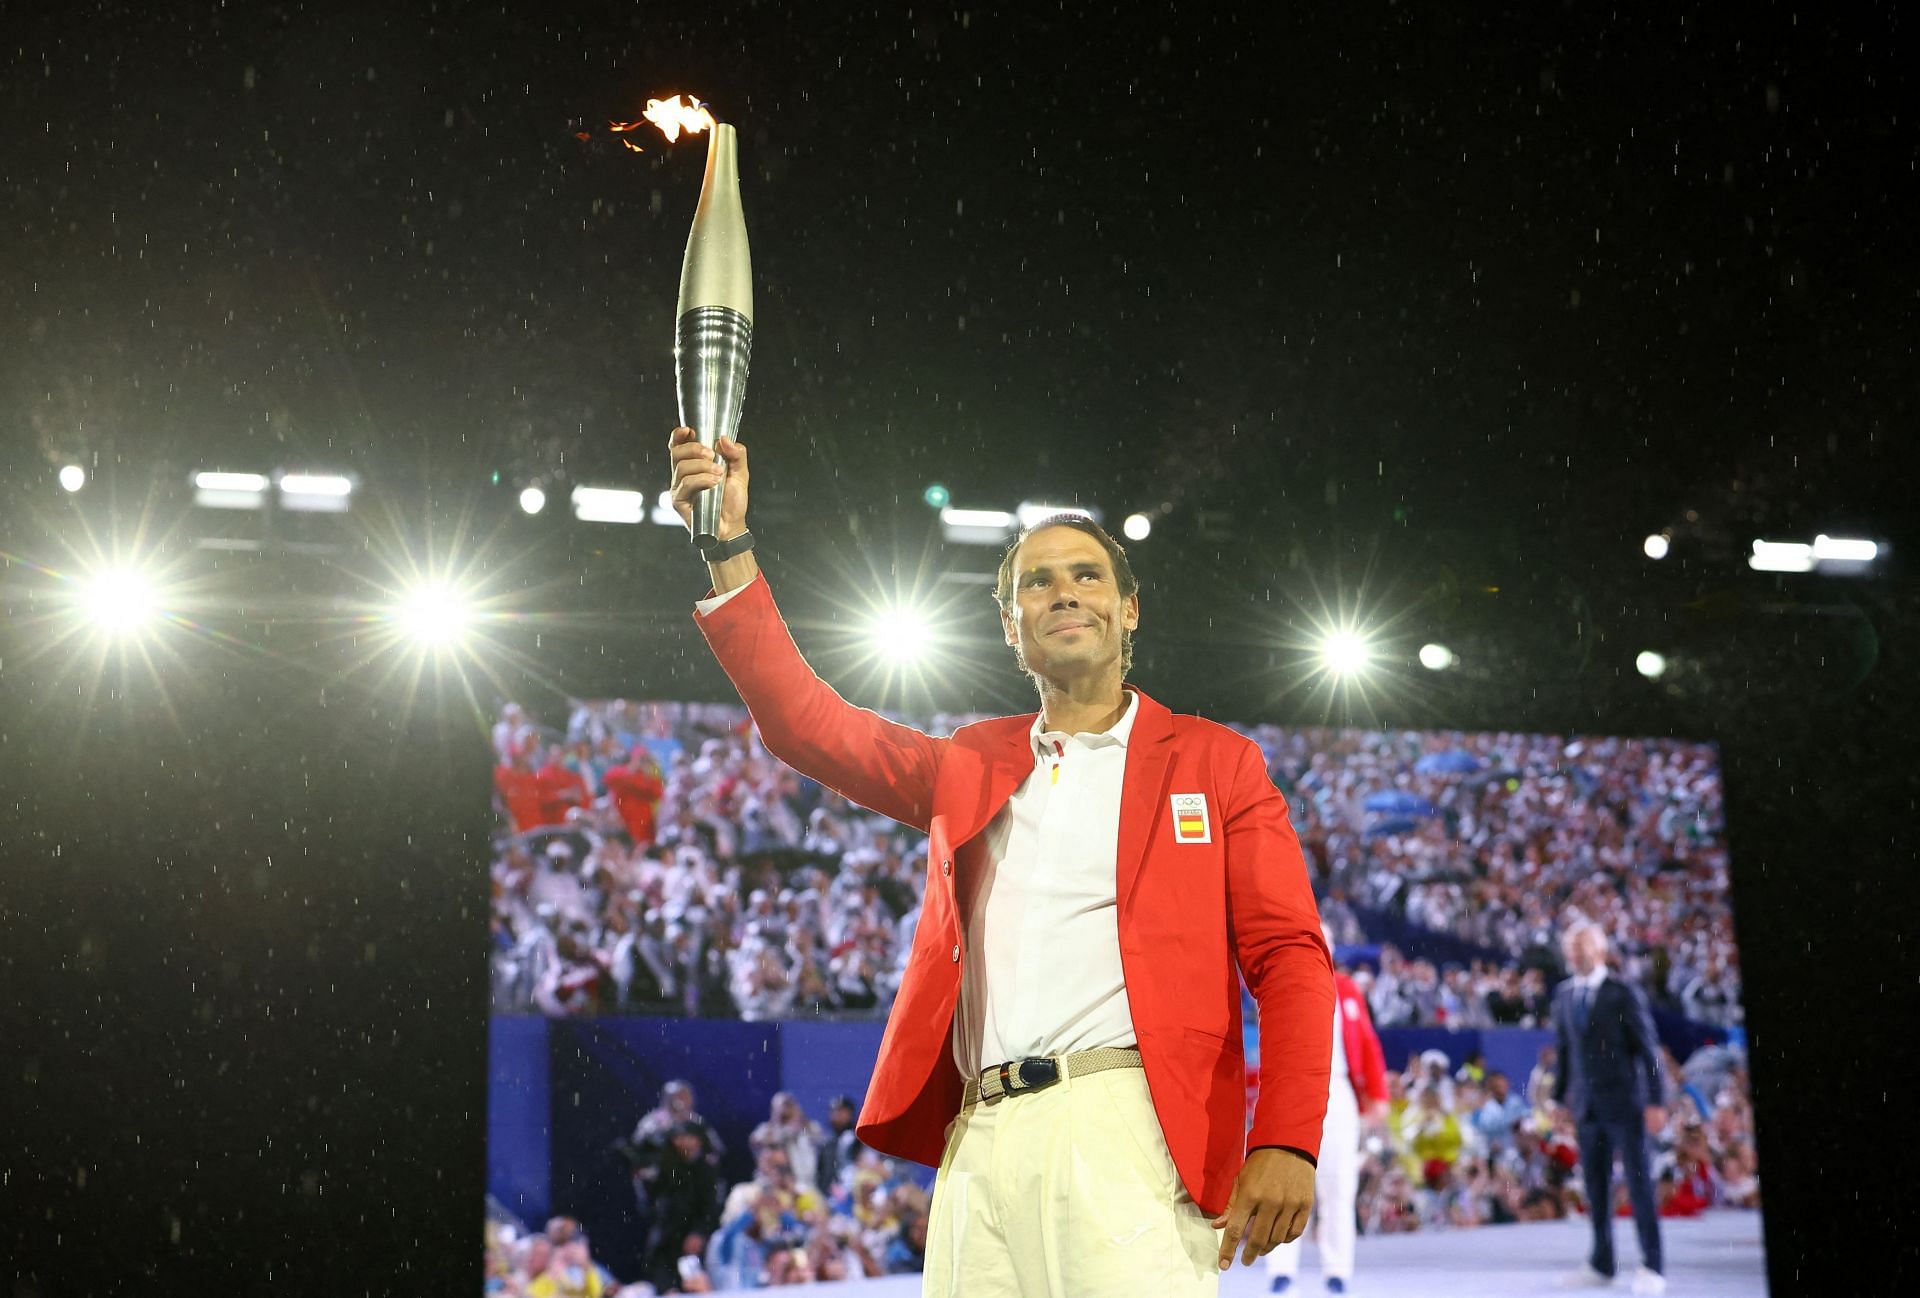 PICTURE: Rafael Nadal's stunning Paris Olympics update of him carrying the Olympic torch under a glittering Eiffel Tower goes viral